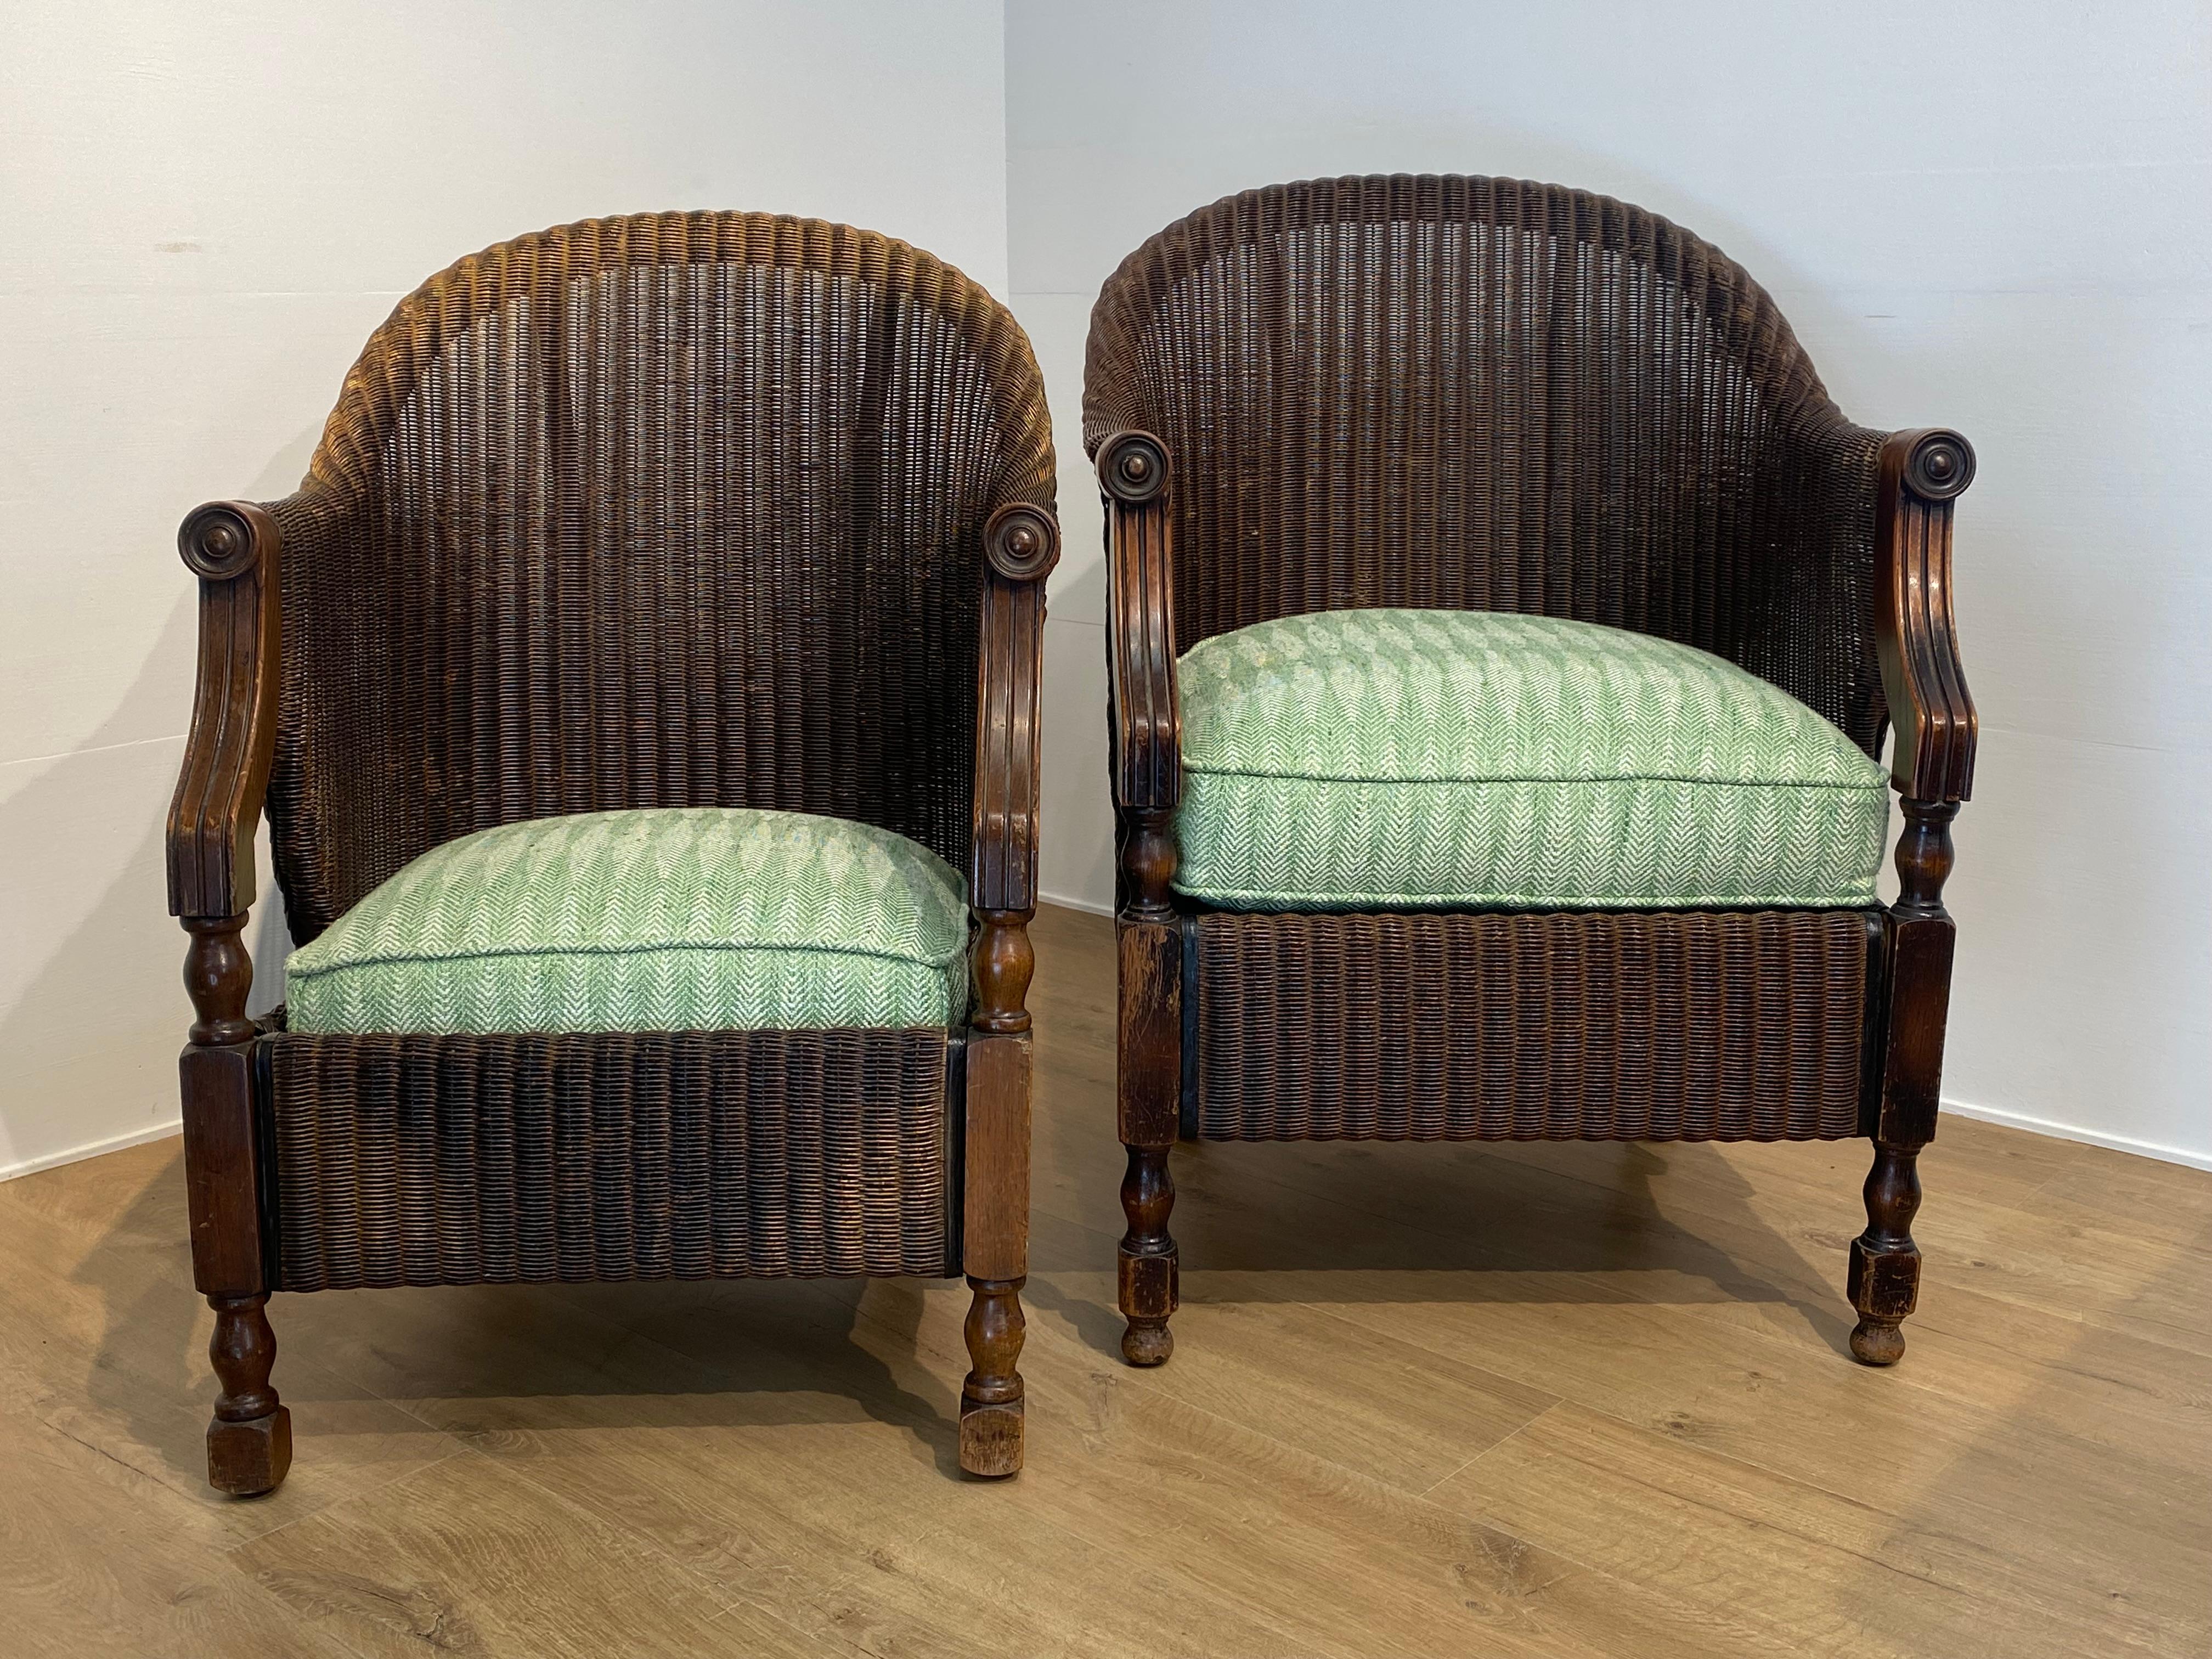 Elegant Pair of  Loyd Loom Club Chairs,
in a basic Brown - Natural Color, the pair consists of a Male and a smaller Female model, good and warm patina of the polish d rattan,
the seats are newly upholstered with the Spanish Fabric of Gaston Y 